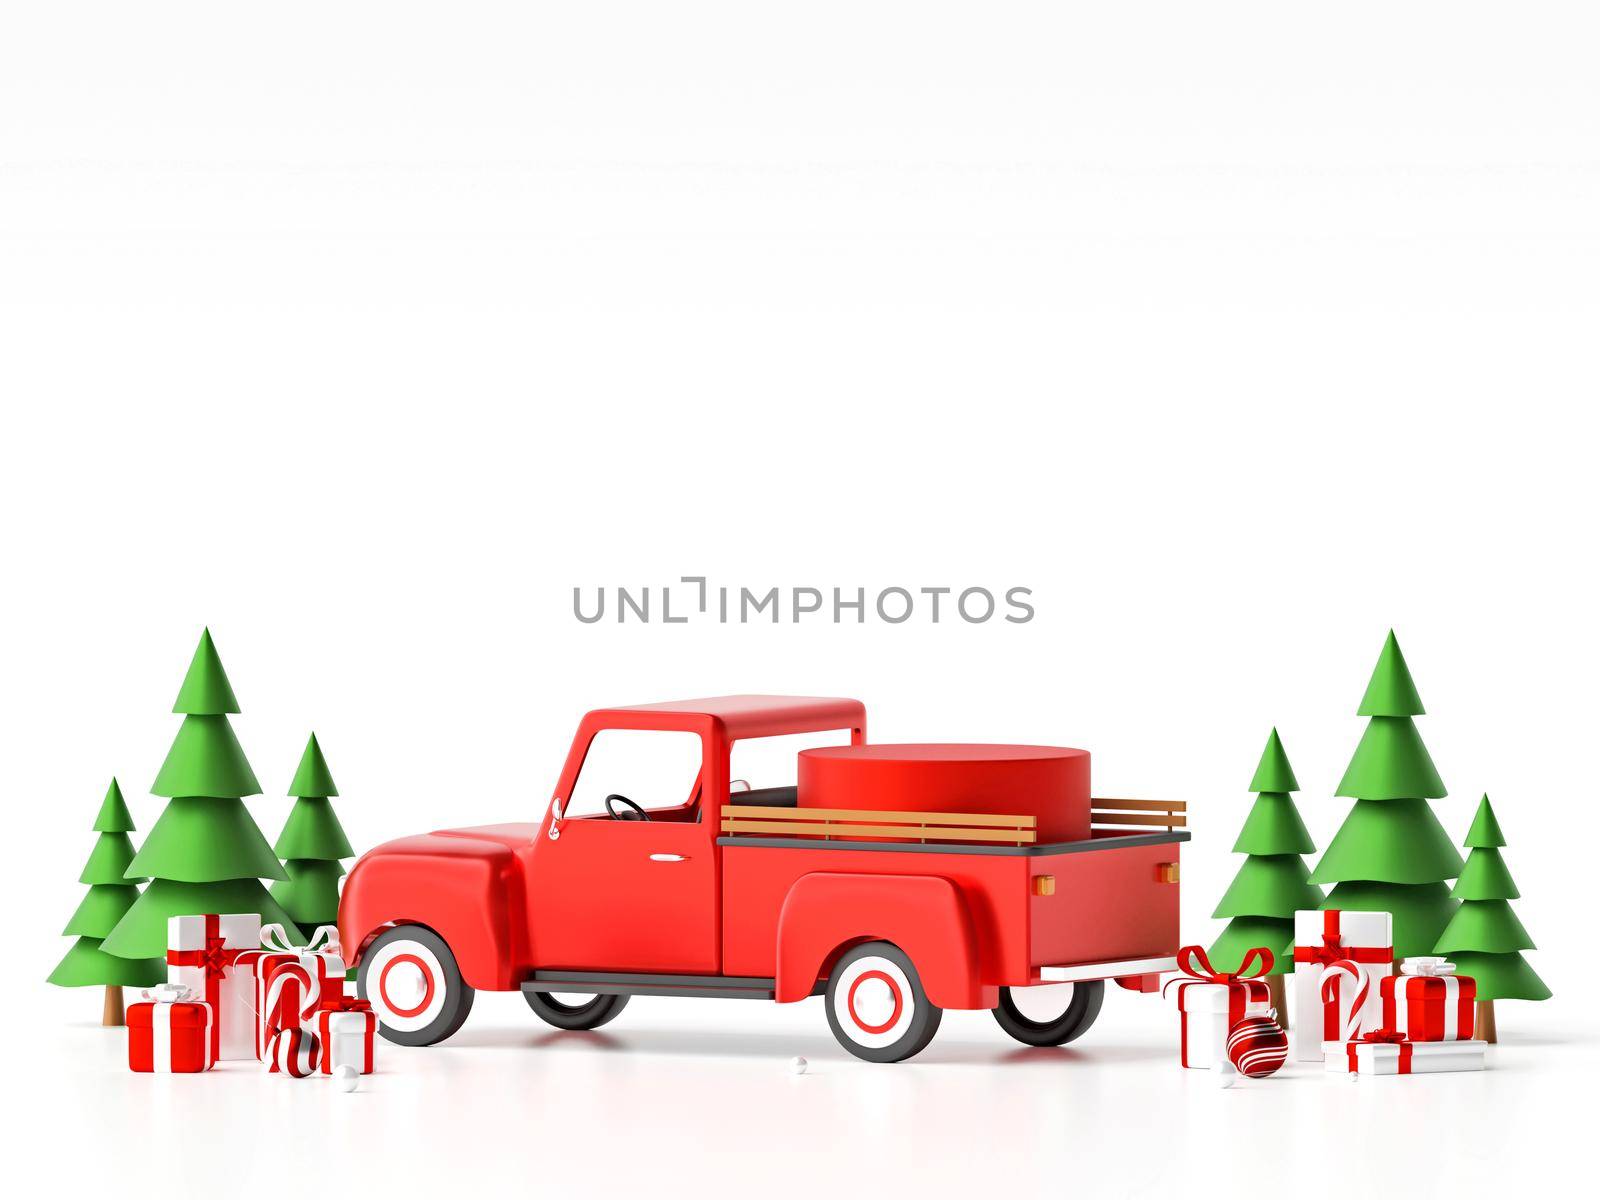 Geometric podium on Christmas car with Christmas gift for product advertisement, 3d illustration by nutzchotwarut